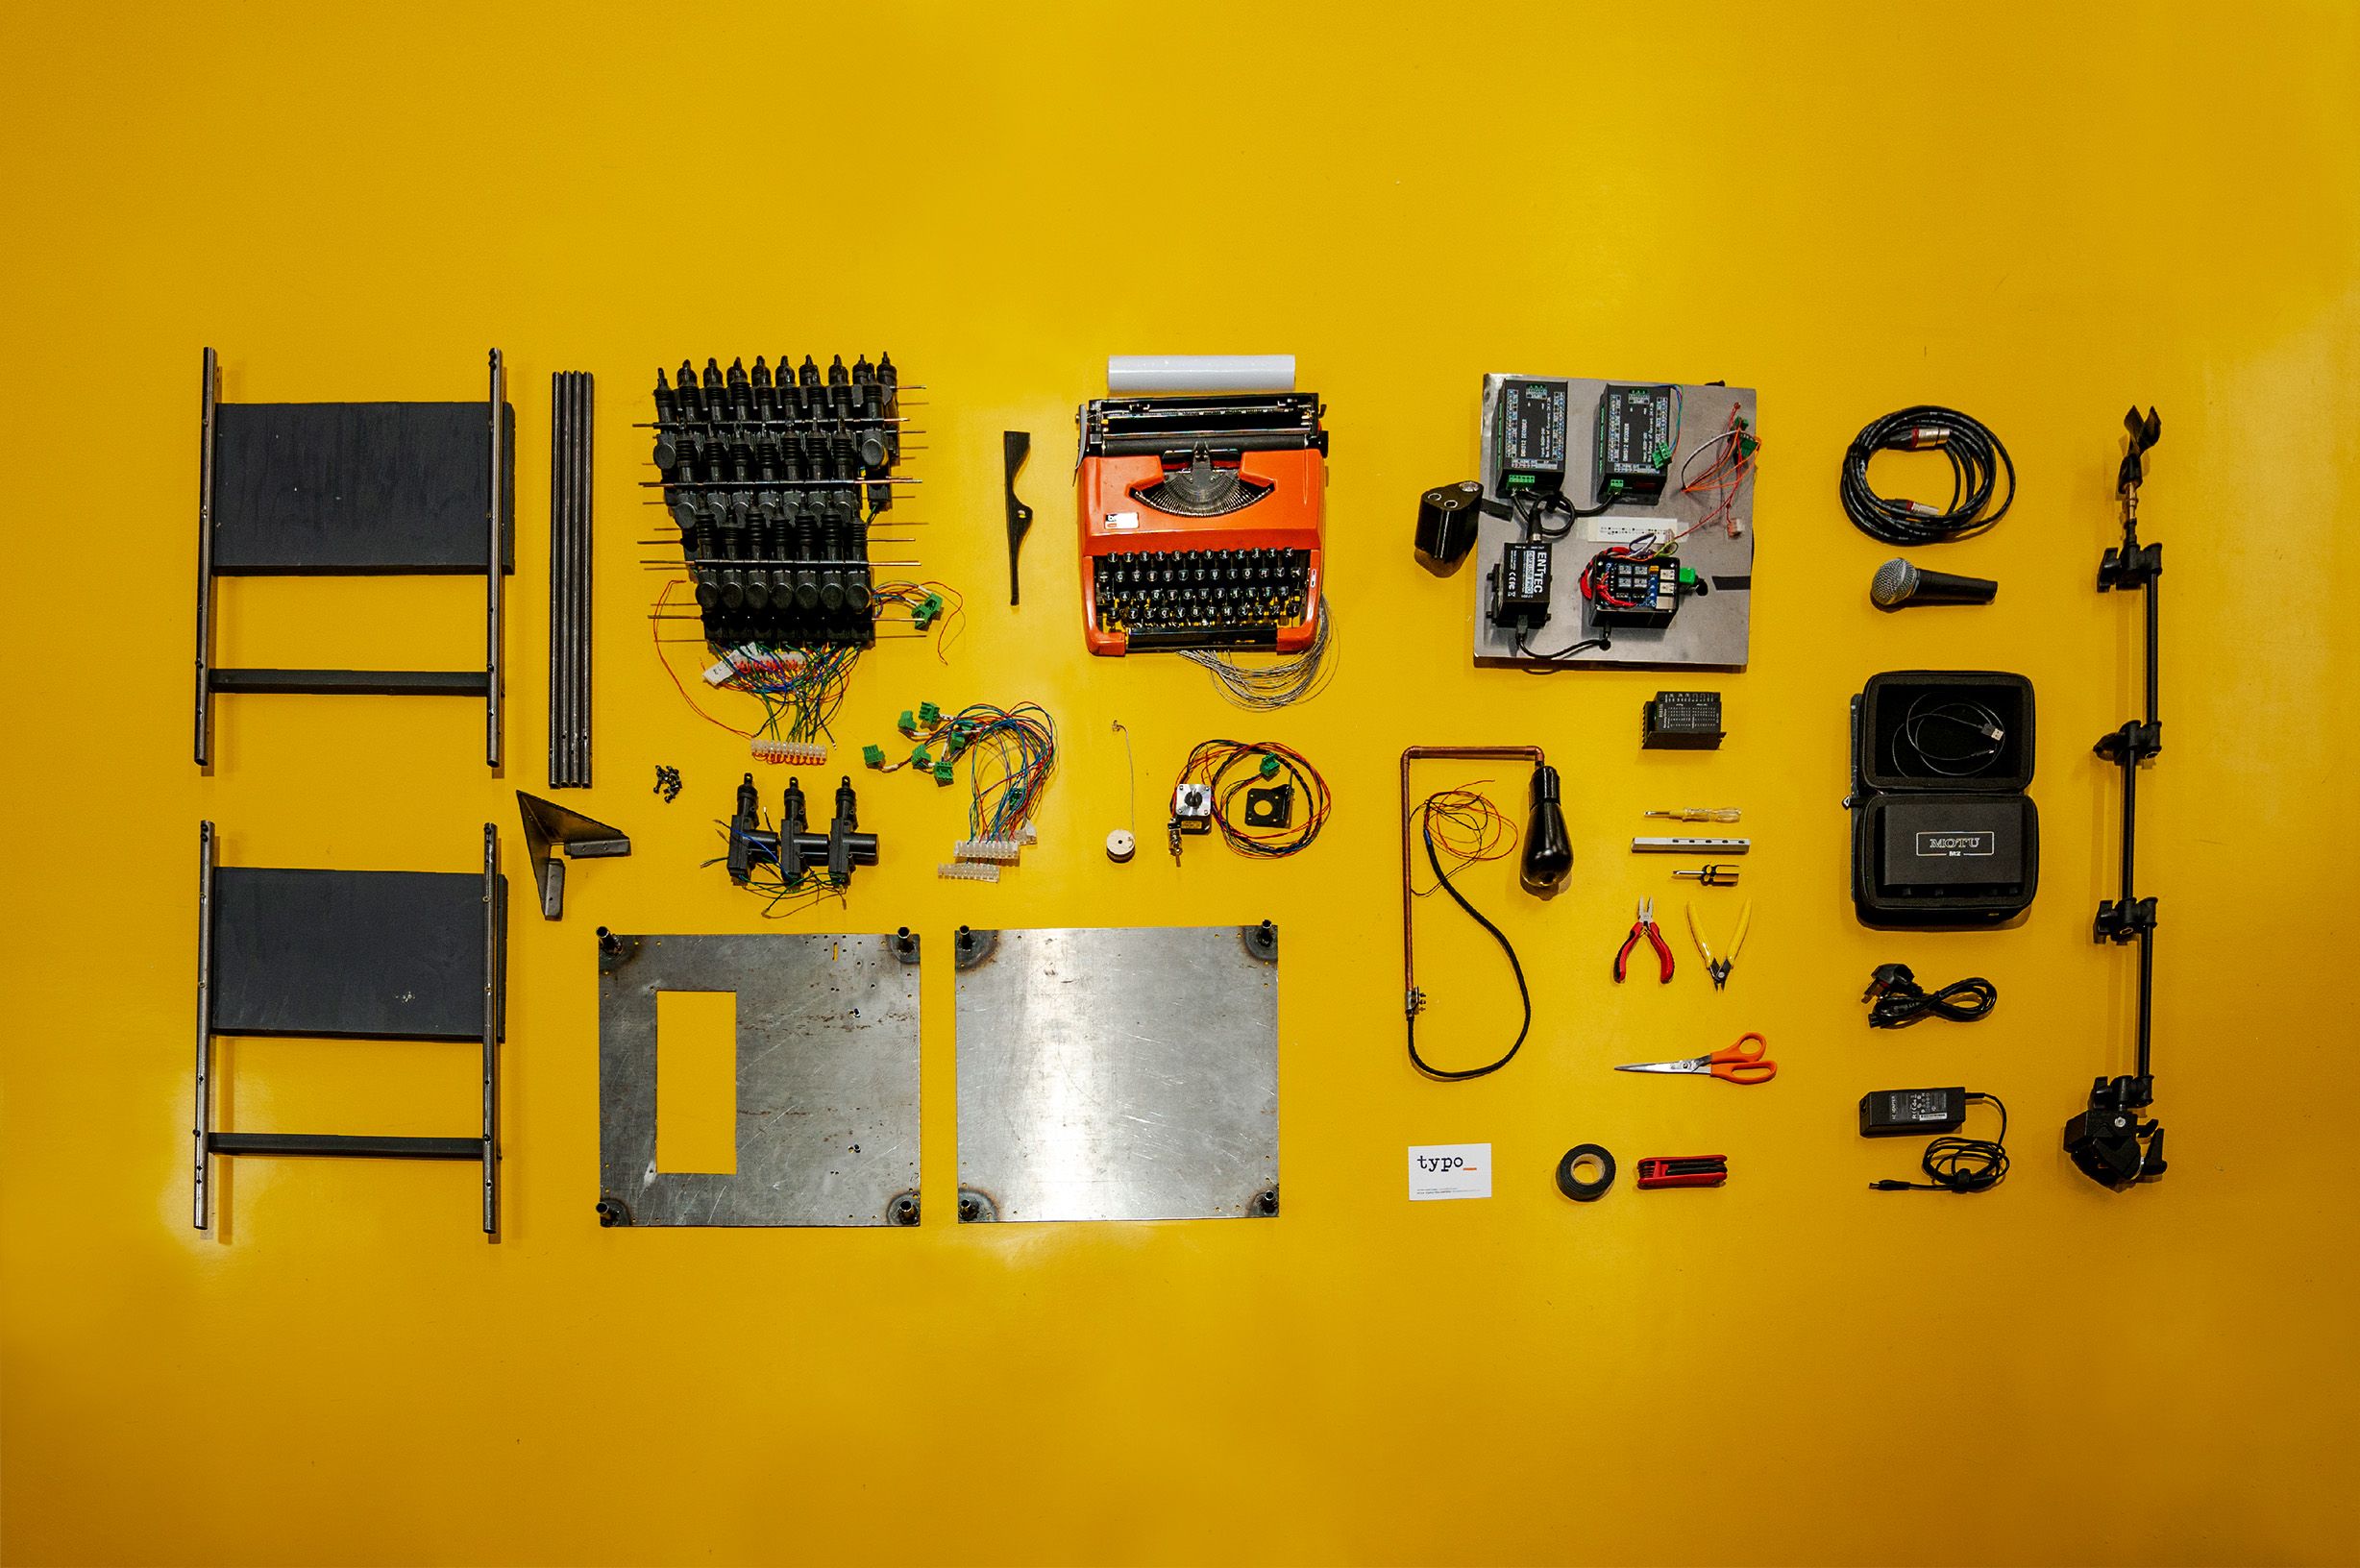 All the components of the project laid out on the floor